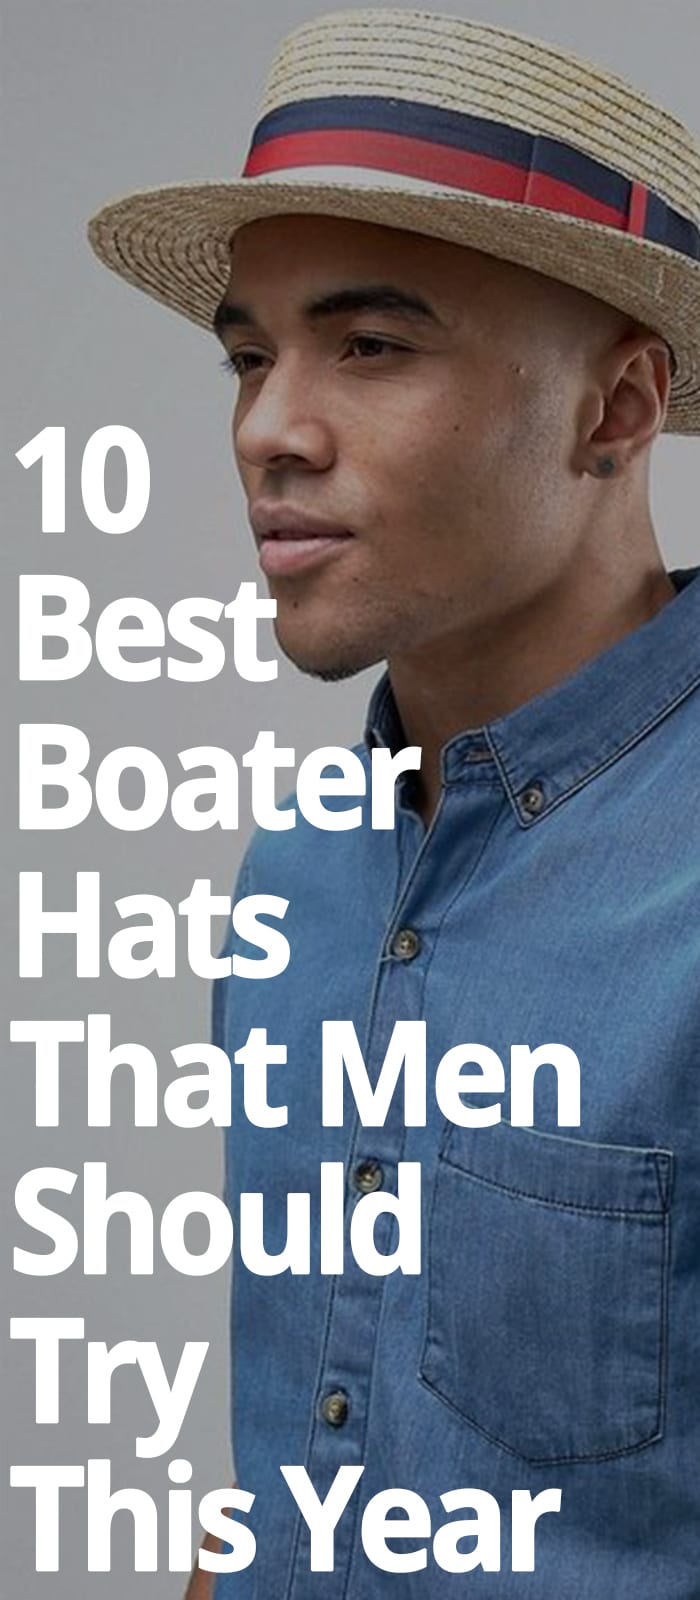 10 BEST BOATER HATS